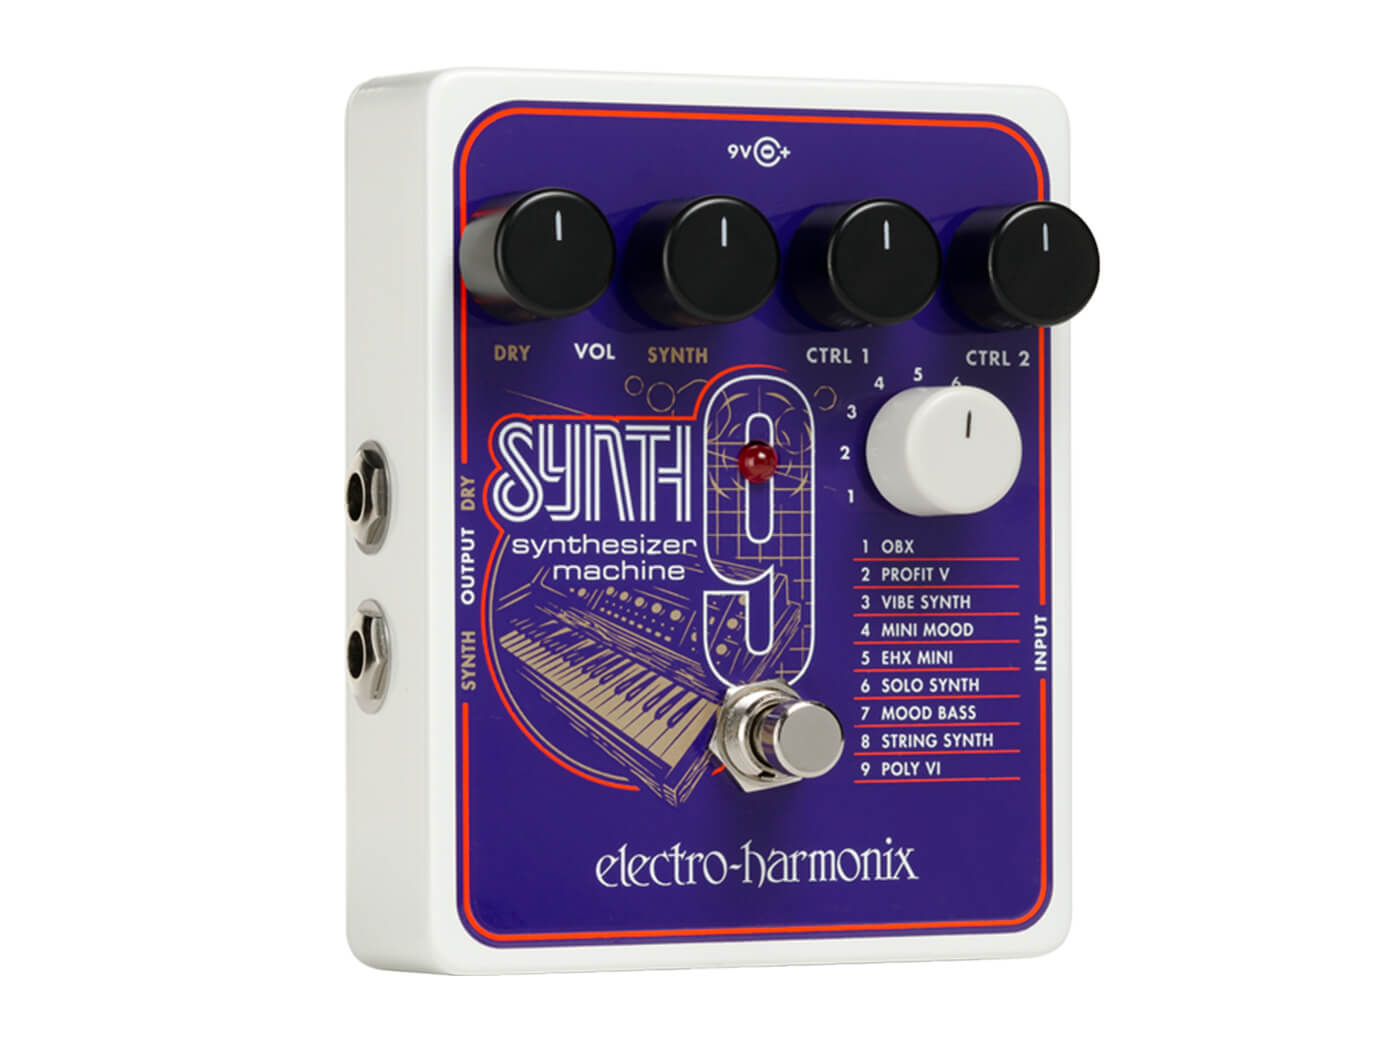 The EHX Synth9